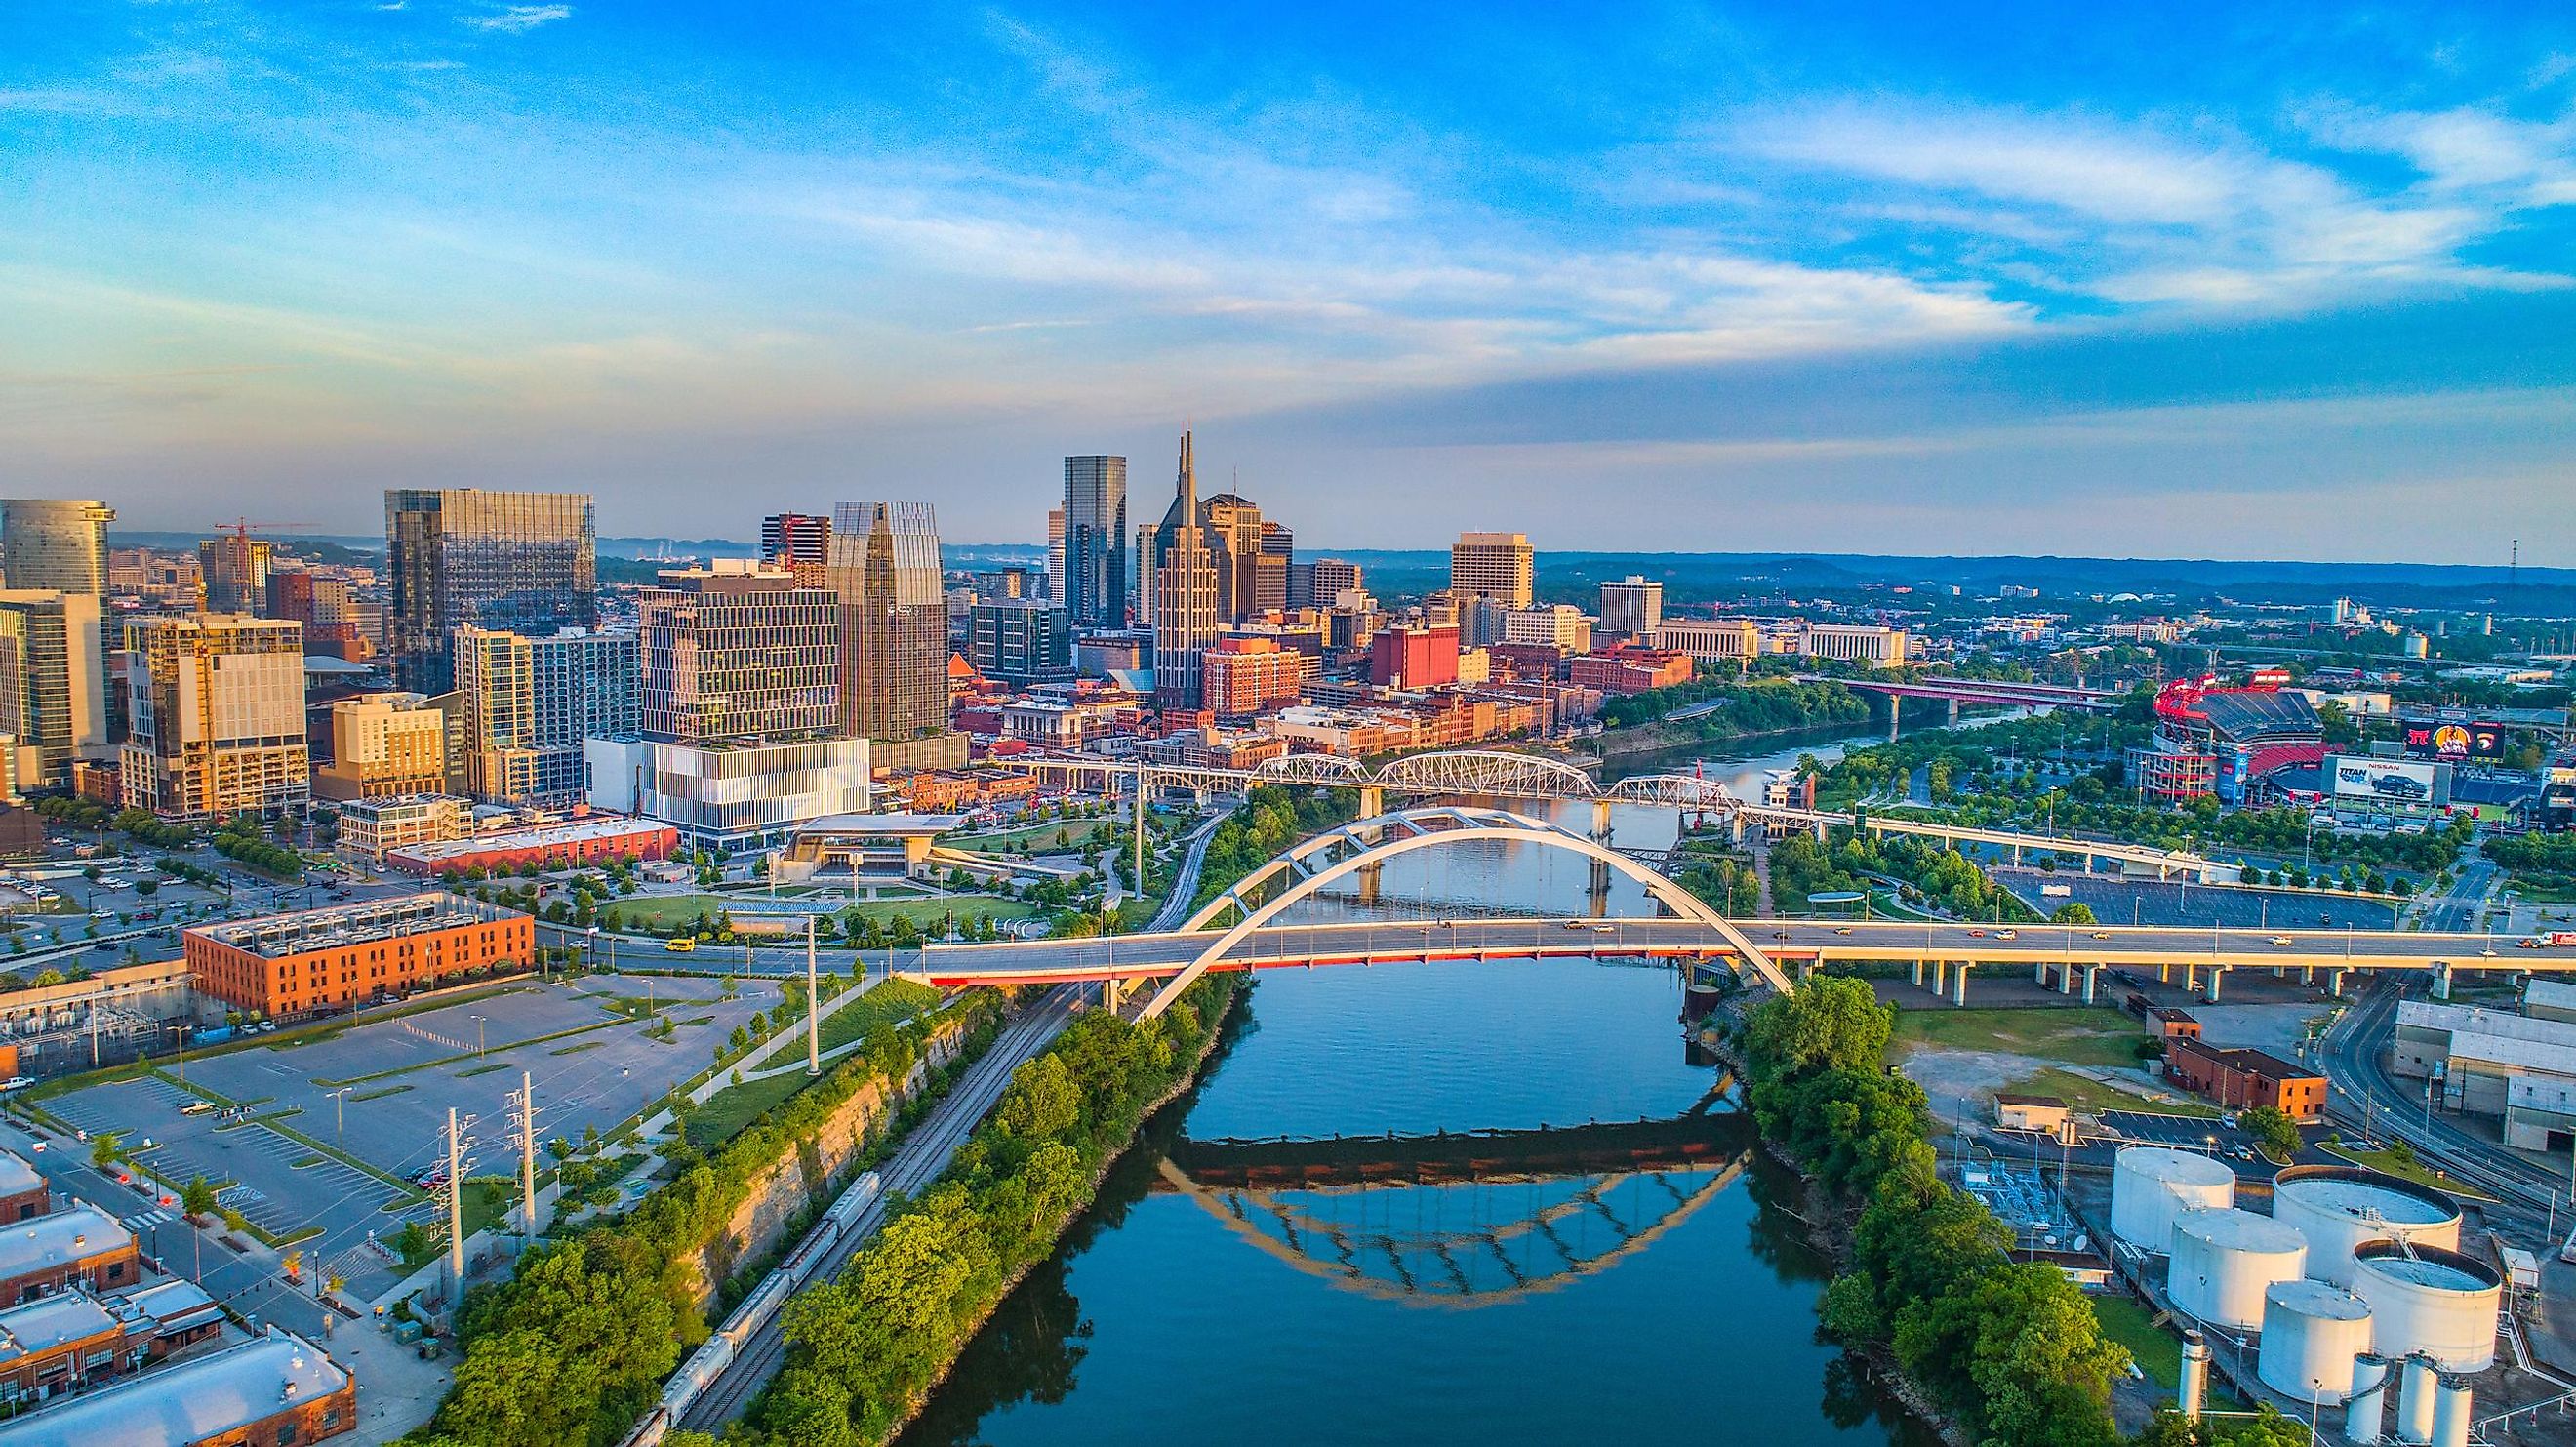 The gorgeous city of Nashville, Tennessee.